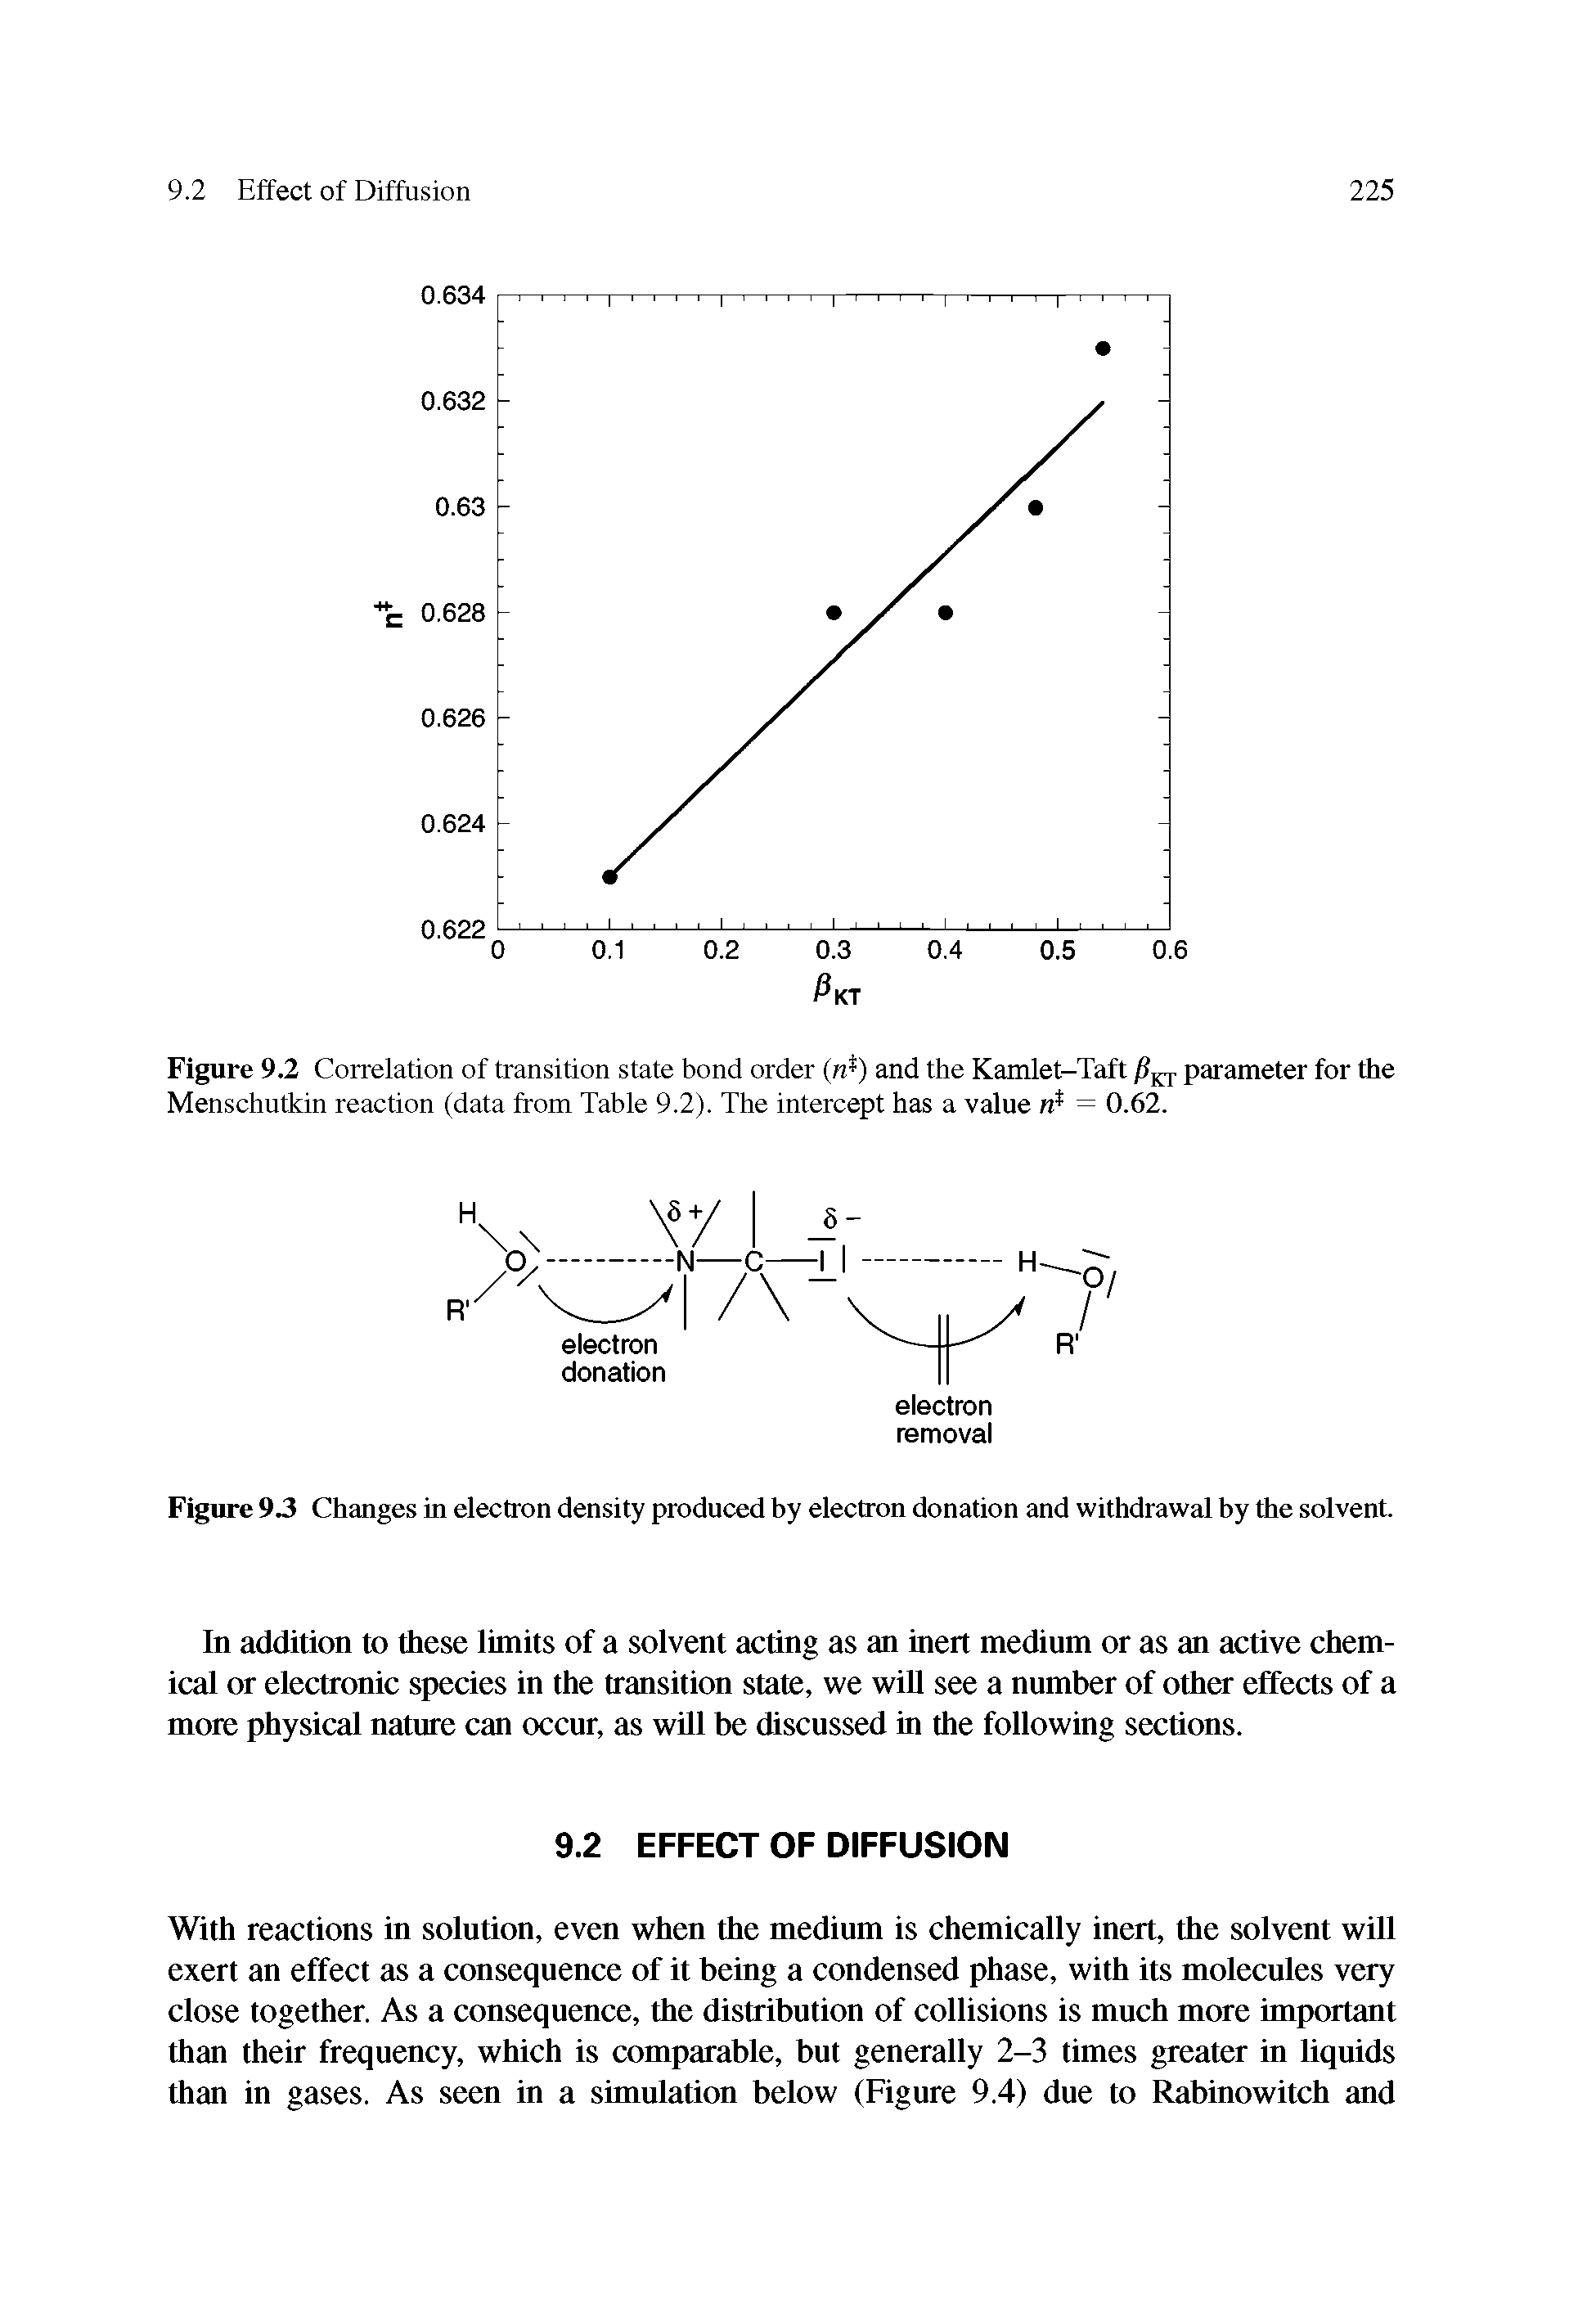 Figure 9.2 Correlation of transition state bond order (n ) and the Kamlet-Taft parameter for the Menschutkin reaction (data from Table 9.2). The intercept has a value = 0.62.